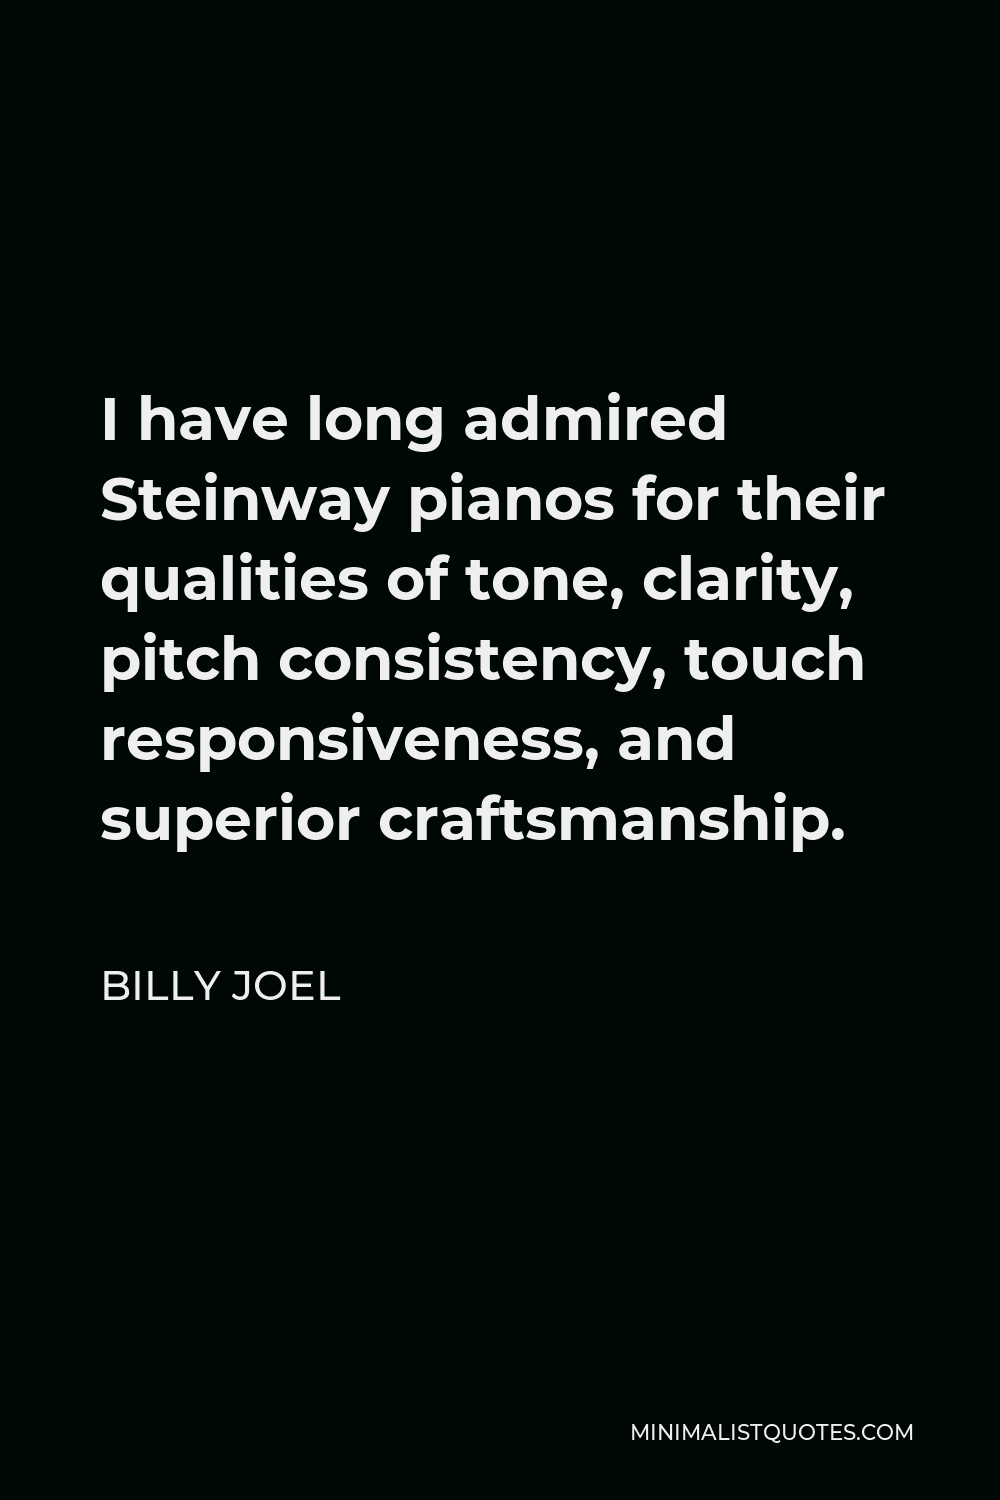 Billy Joel Quote - I have long admired Steinway pianos for their qualities of tone, clarity, pitch consistency, touch responsiveness, and superior craftsmanship.